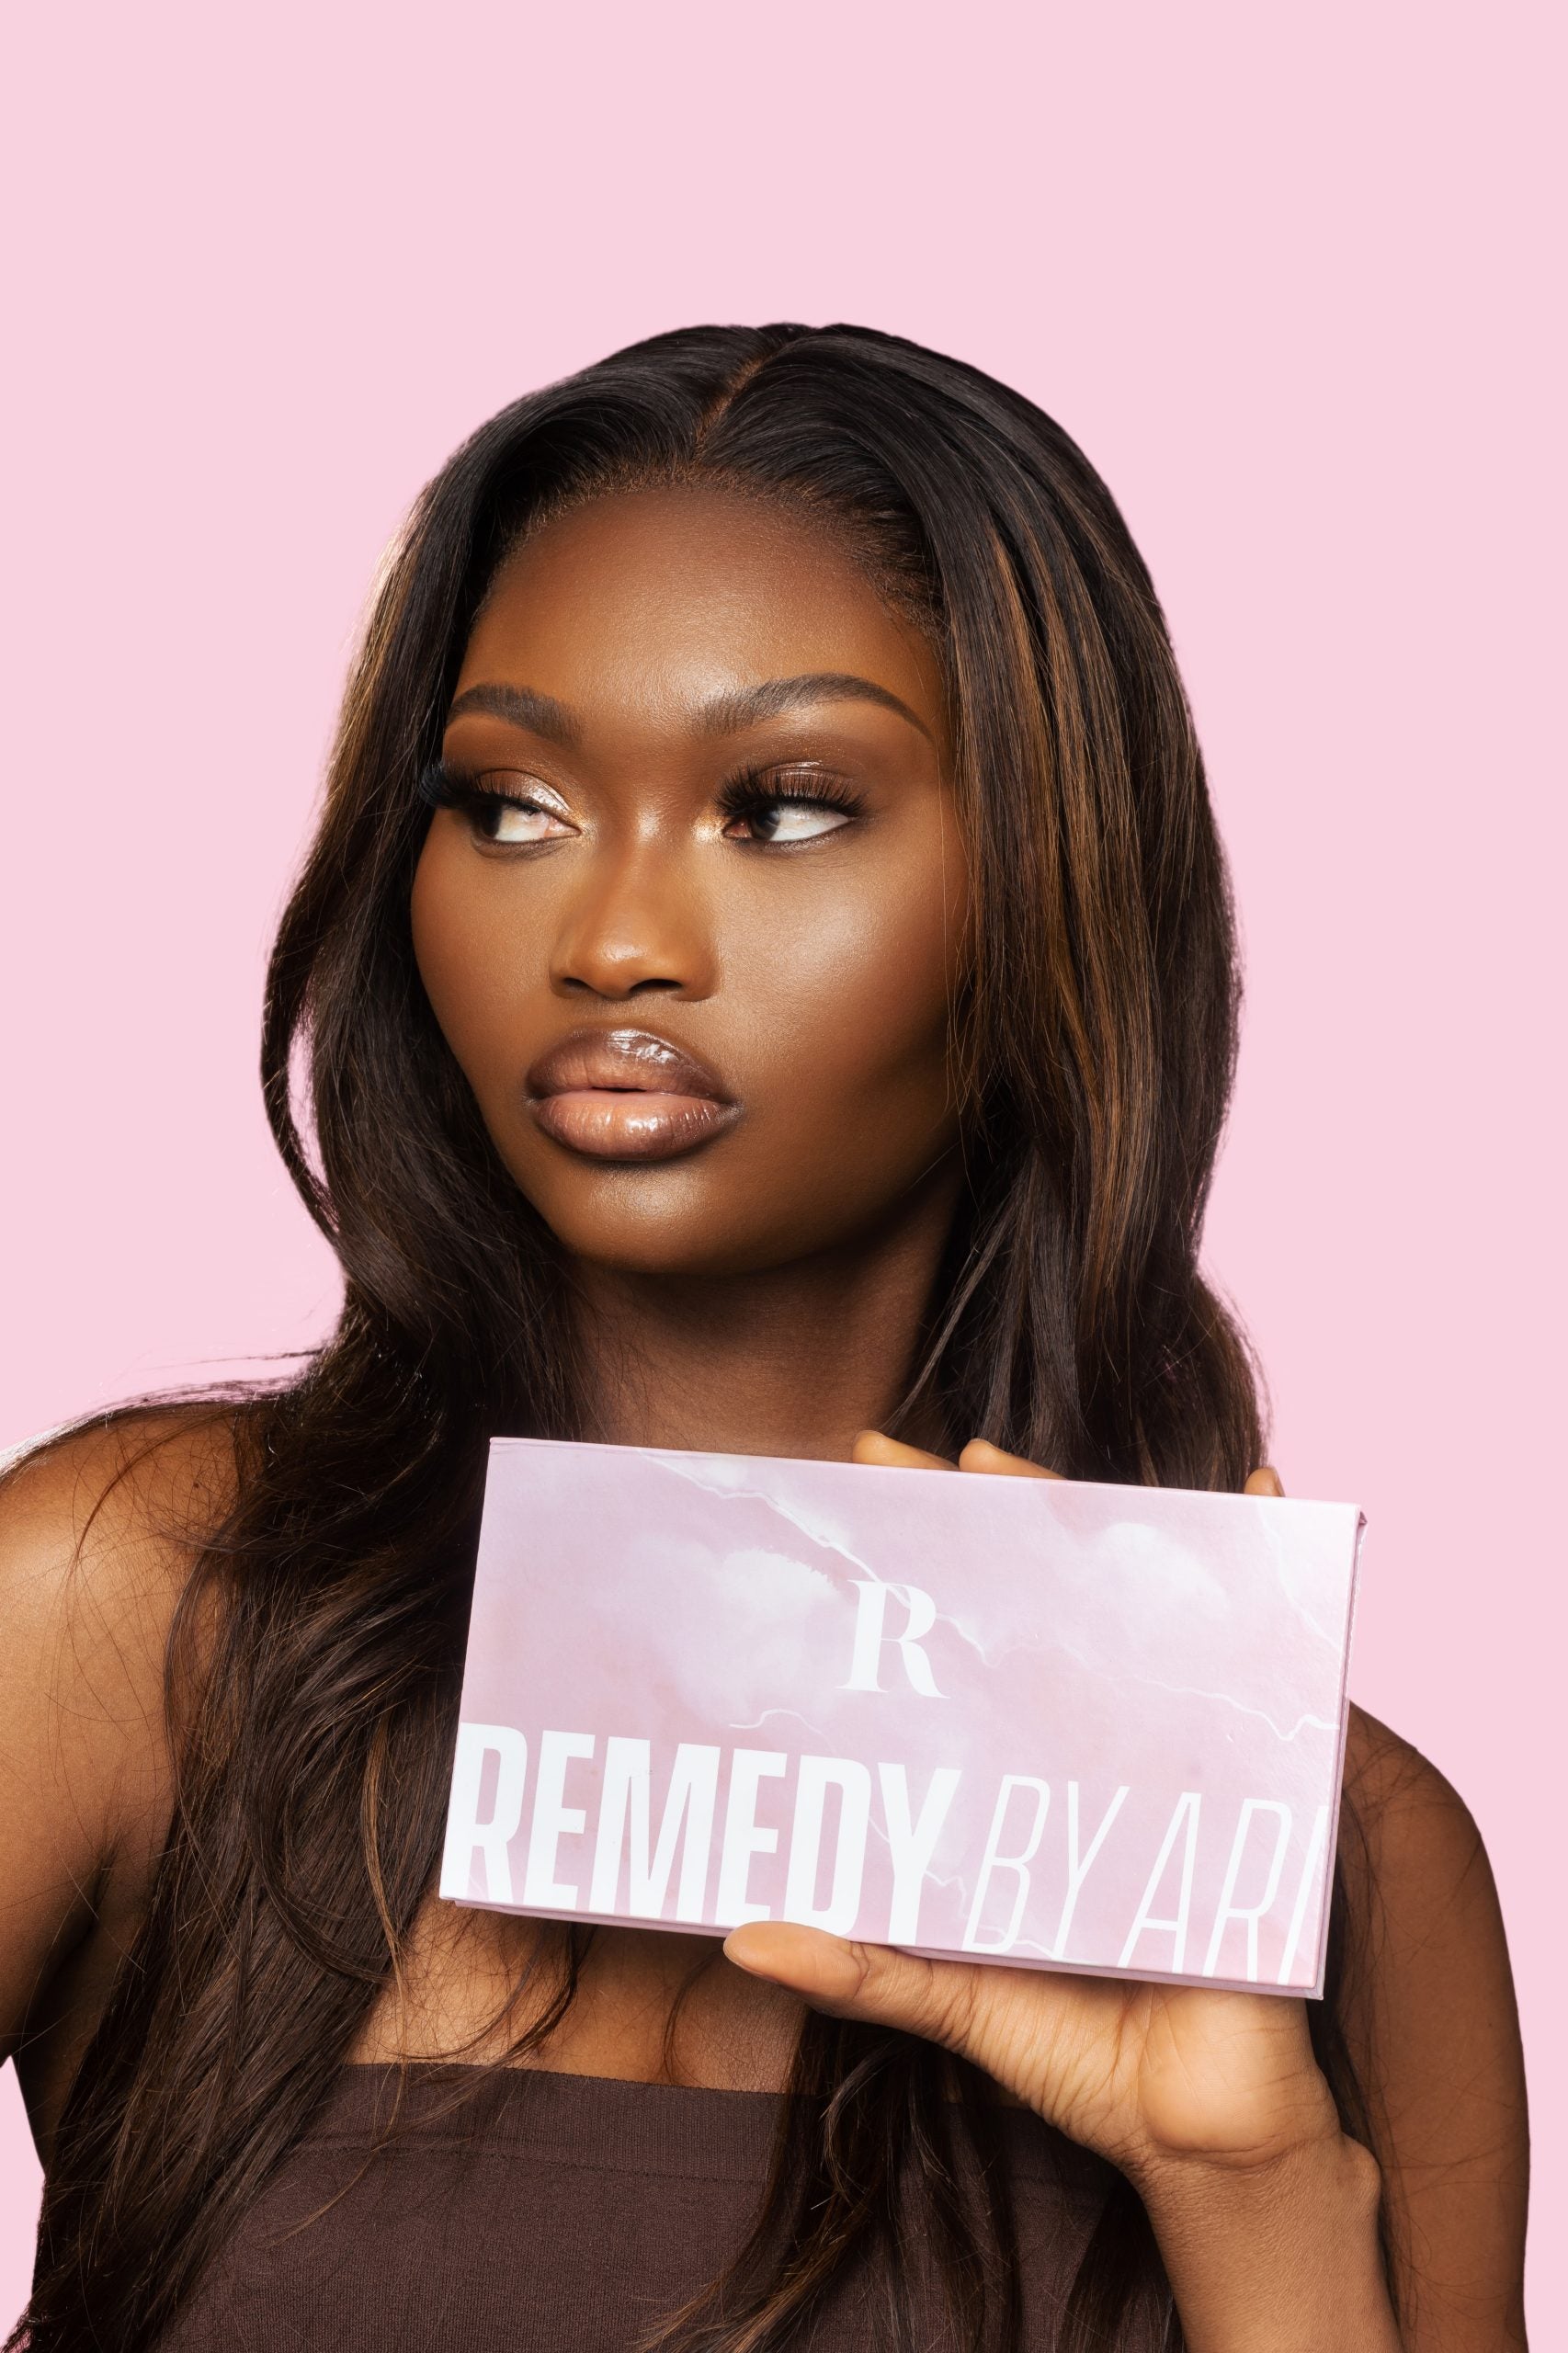 Influencer Ari Fletcher Debuts Her Makeup Line Remedy By Ari - The Source